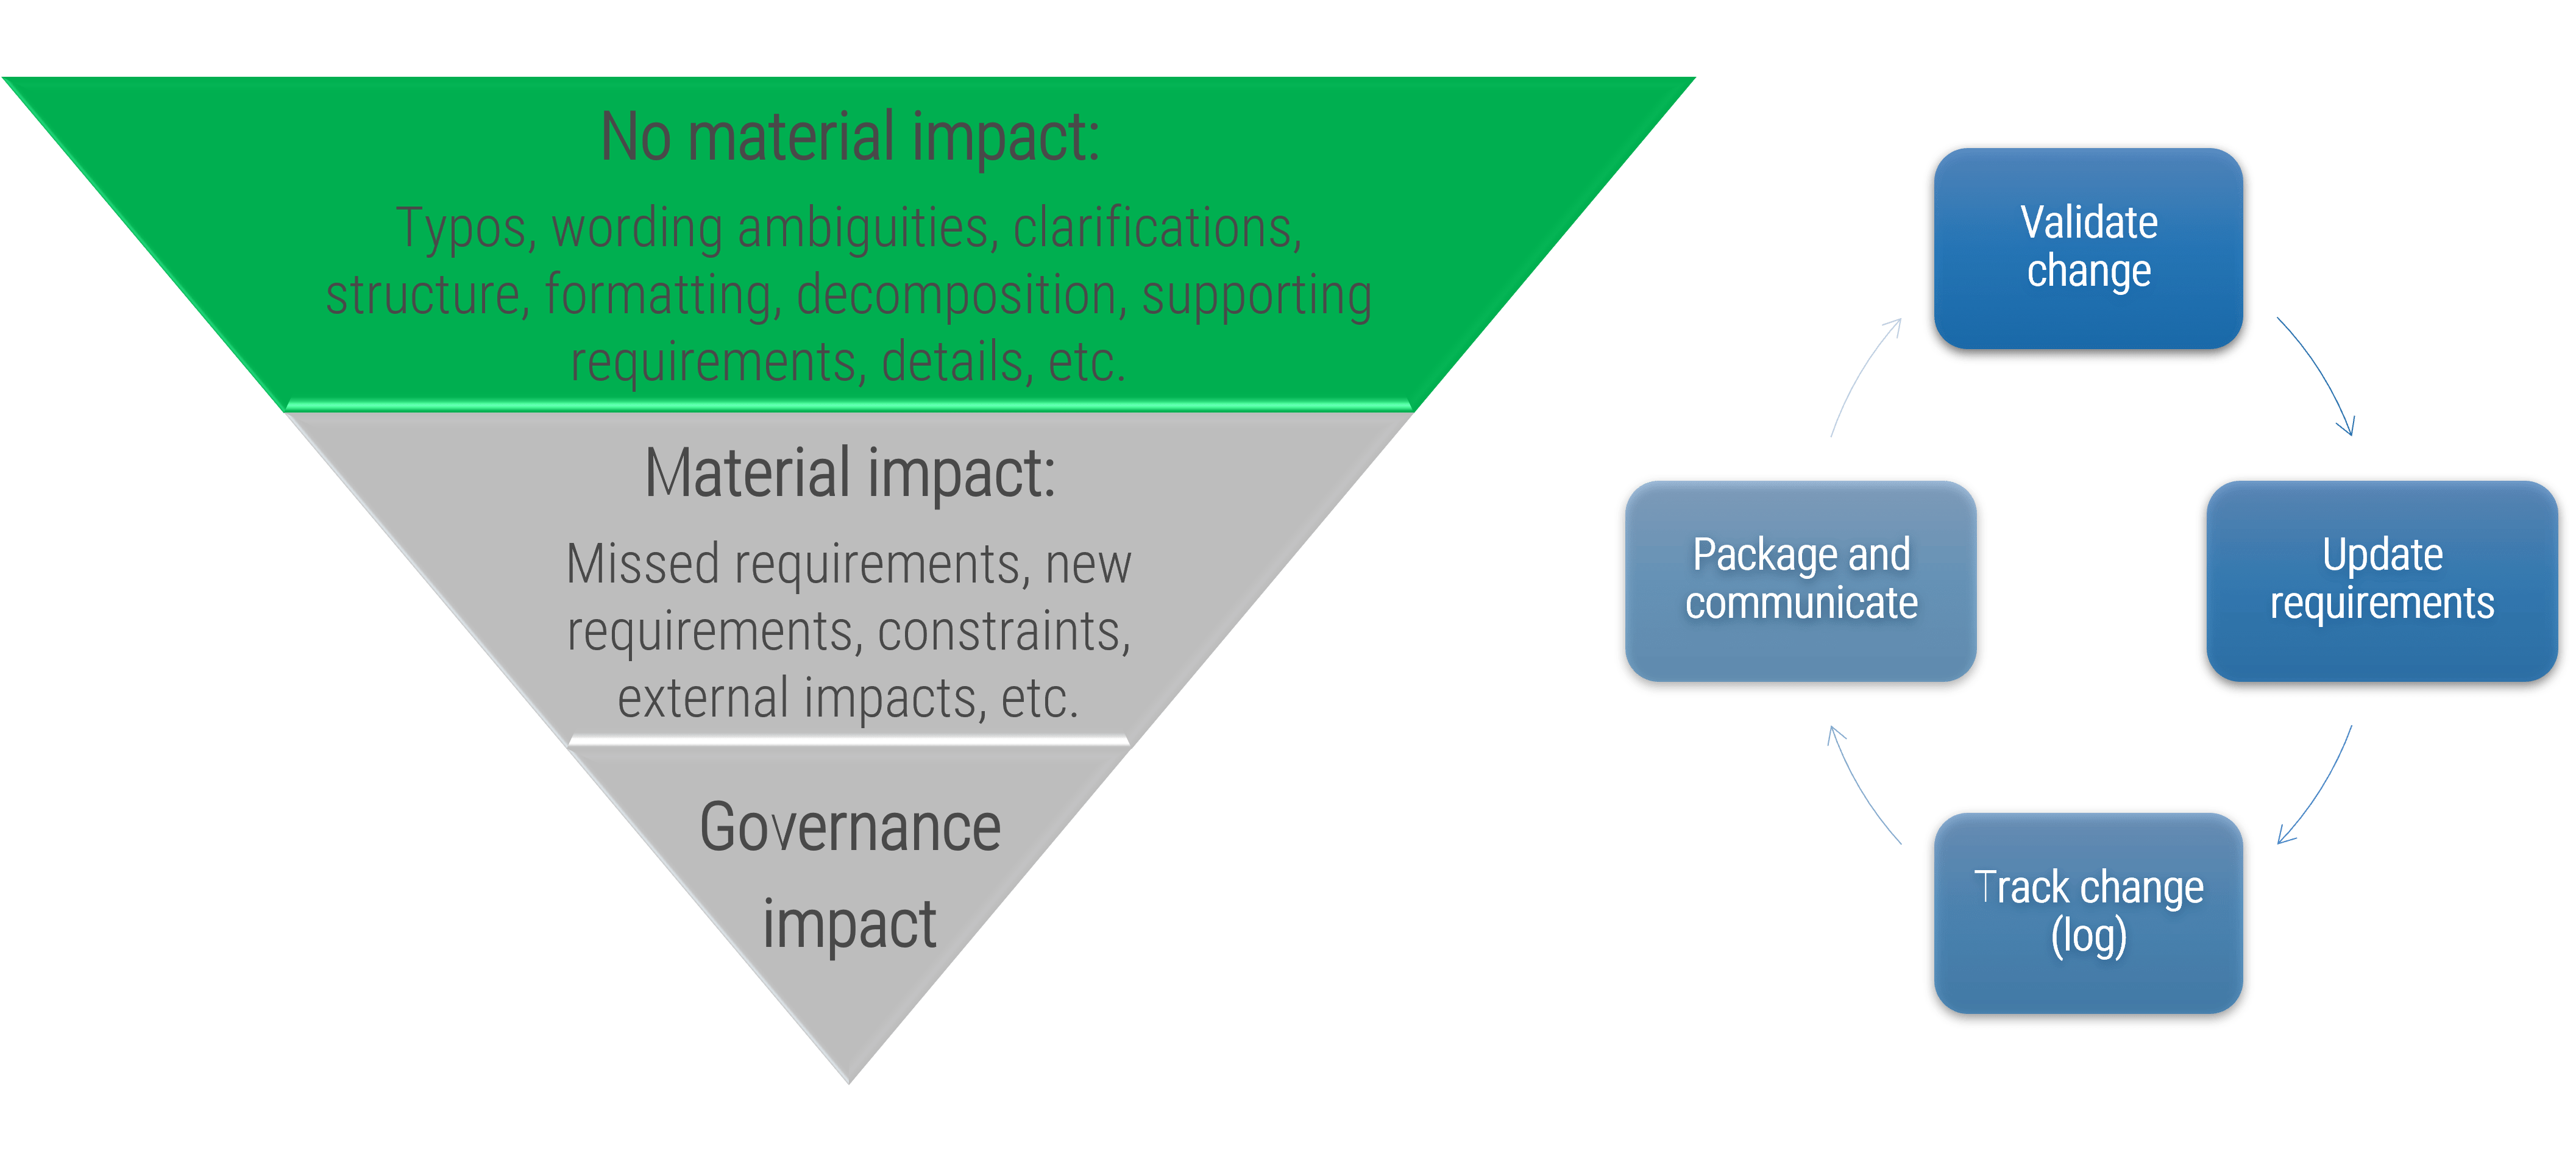 An image of an inverted triangle, with the top being labeled: No Material Impact, the middle being labeled: Material impact; and the bottom being labeled: Governance Impact. To the right of the image, is a cycle including the following terms: Validate change; Update requirements; Track change (log); Package and communicate